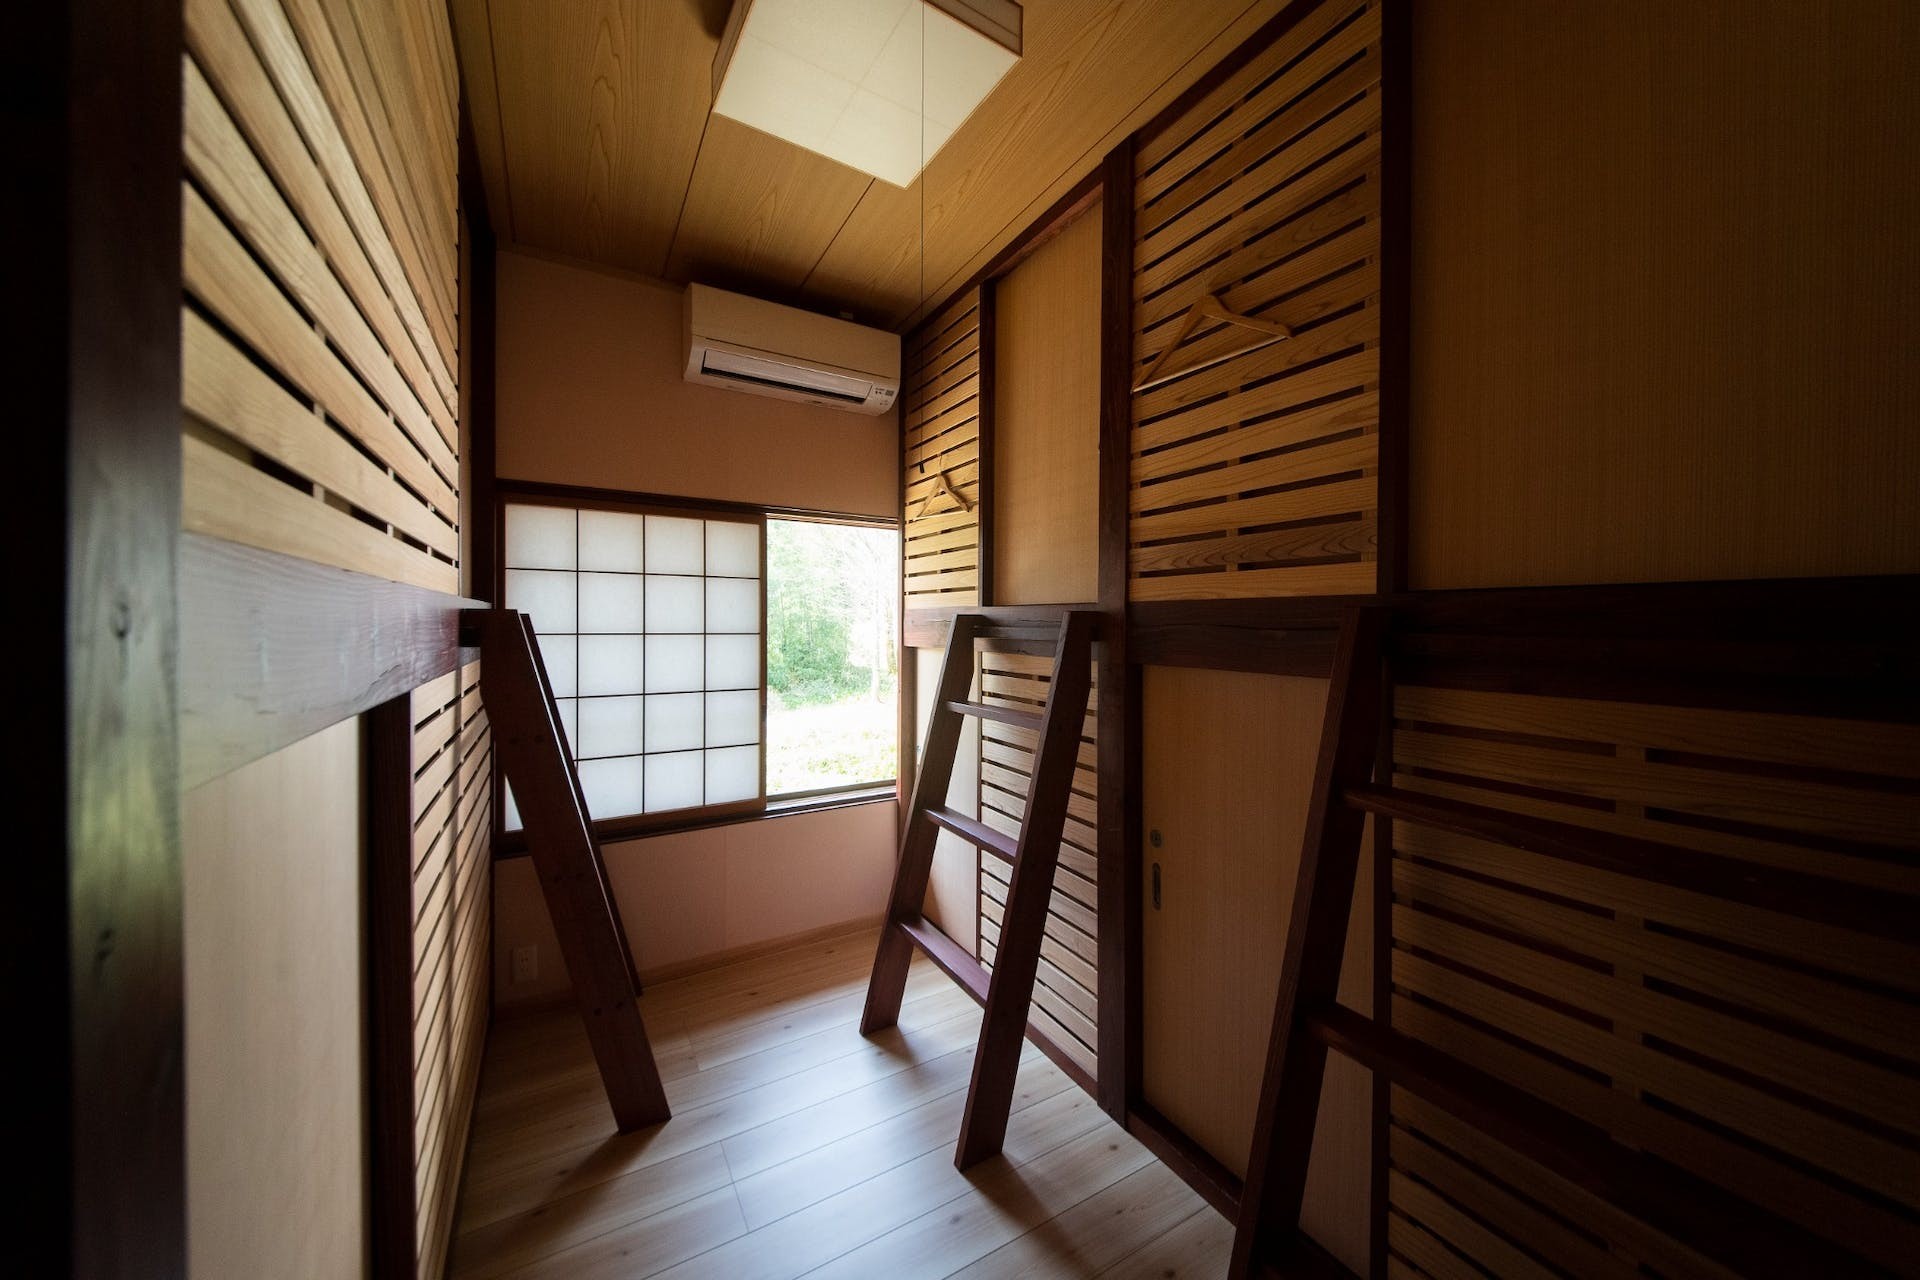 Full of interior decoration and tableware that makes you feel familiar with the traditional culture of Fukui Prefecture